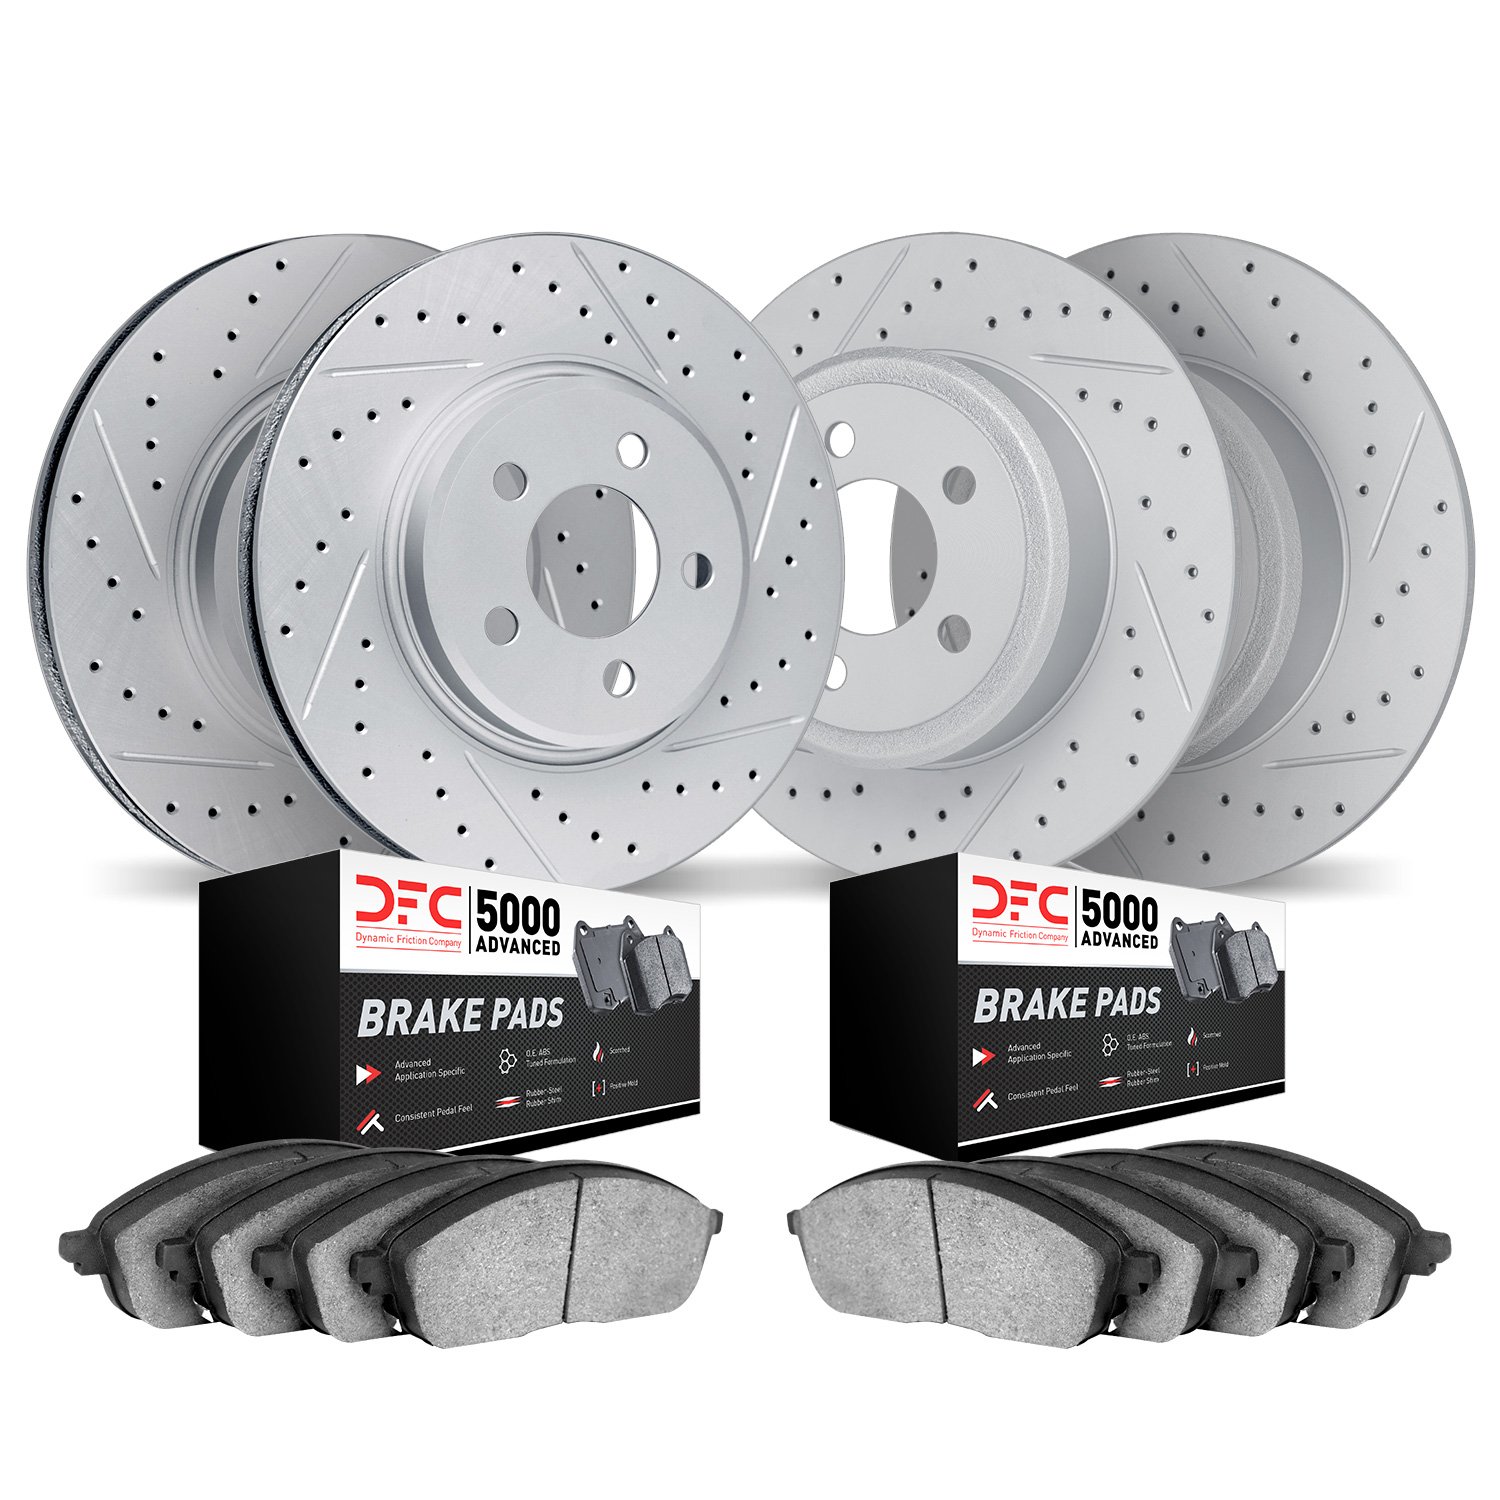 2504-72022 Geoperformance Drilled/Slotted Rotors w/5000 Advanced Brake Pads Kit, 2004-2012 Mitsubishi, Position: Front and Rear